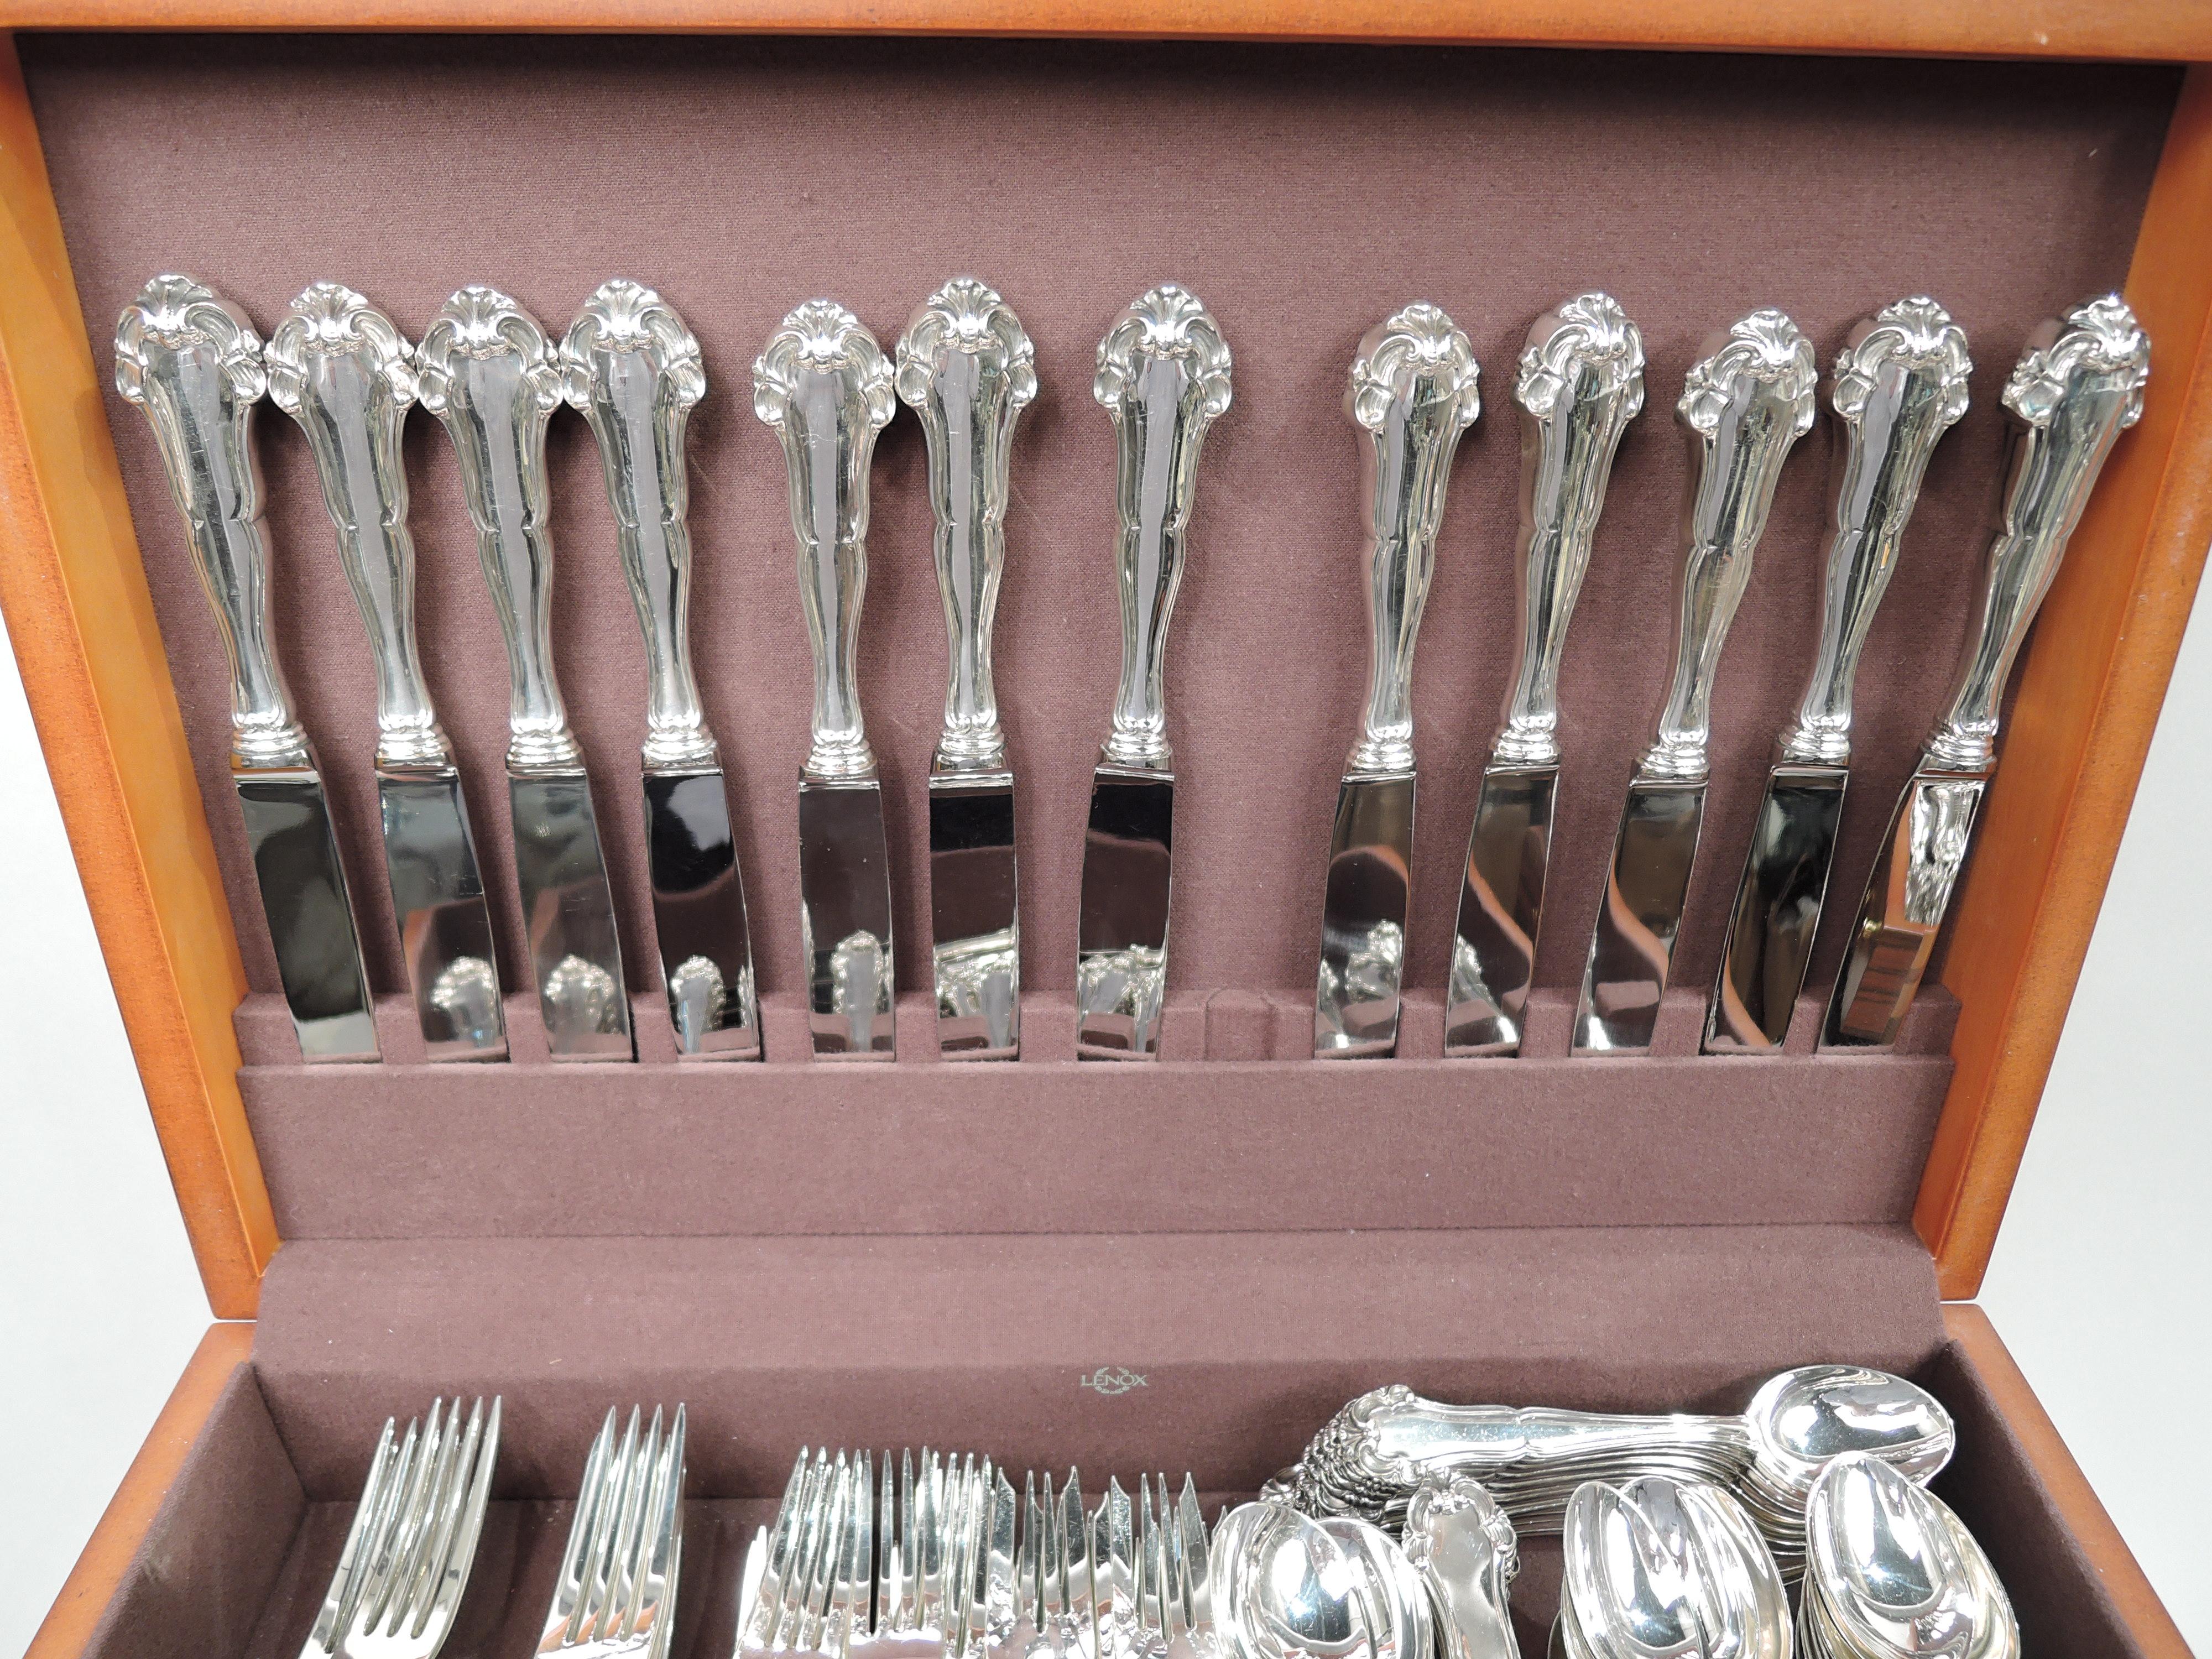 Italian Buccellati Grande Imperiale Sterling Silver Dinner & Lunch Set for 16